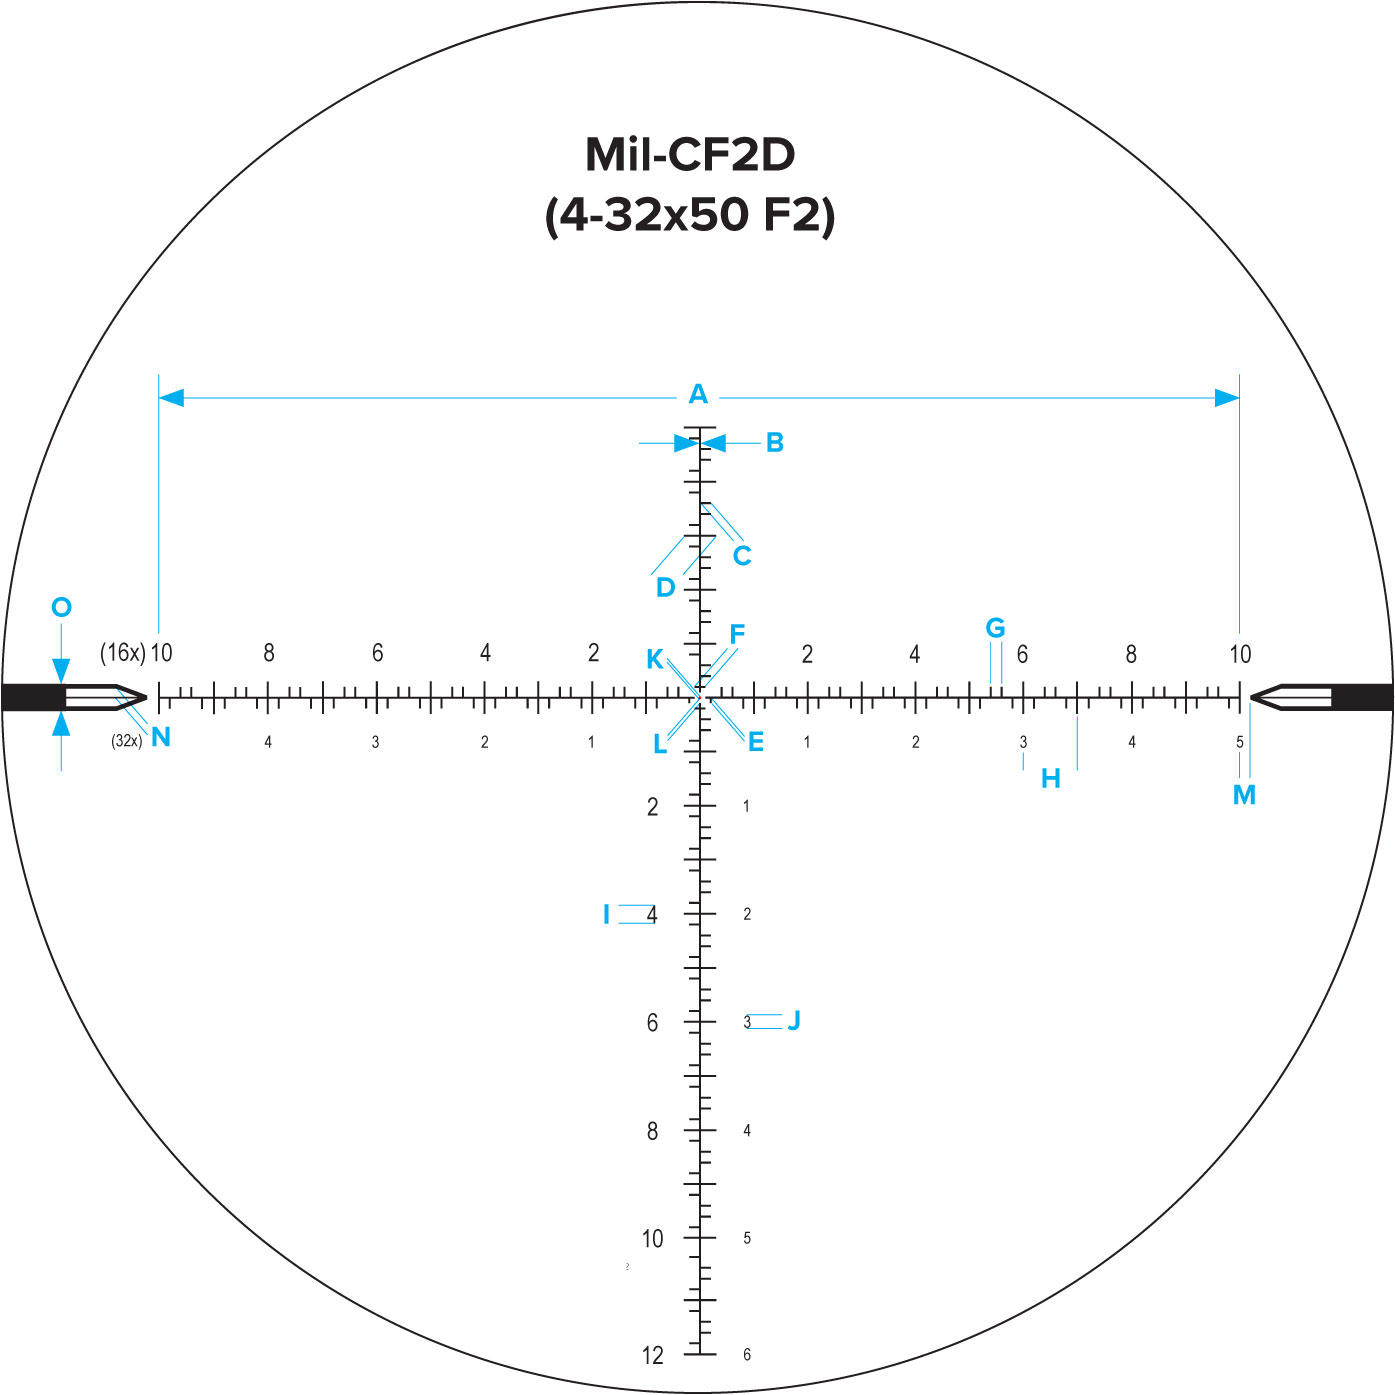 Reticle_Spec_Sheets - NF_MIL-CF2-4-32x_Dimensions